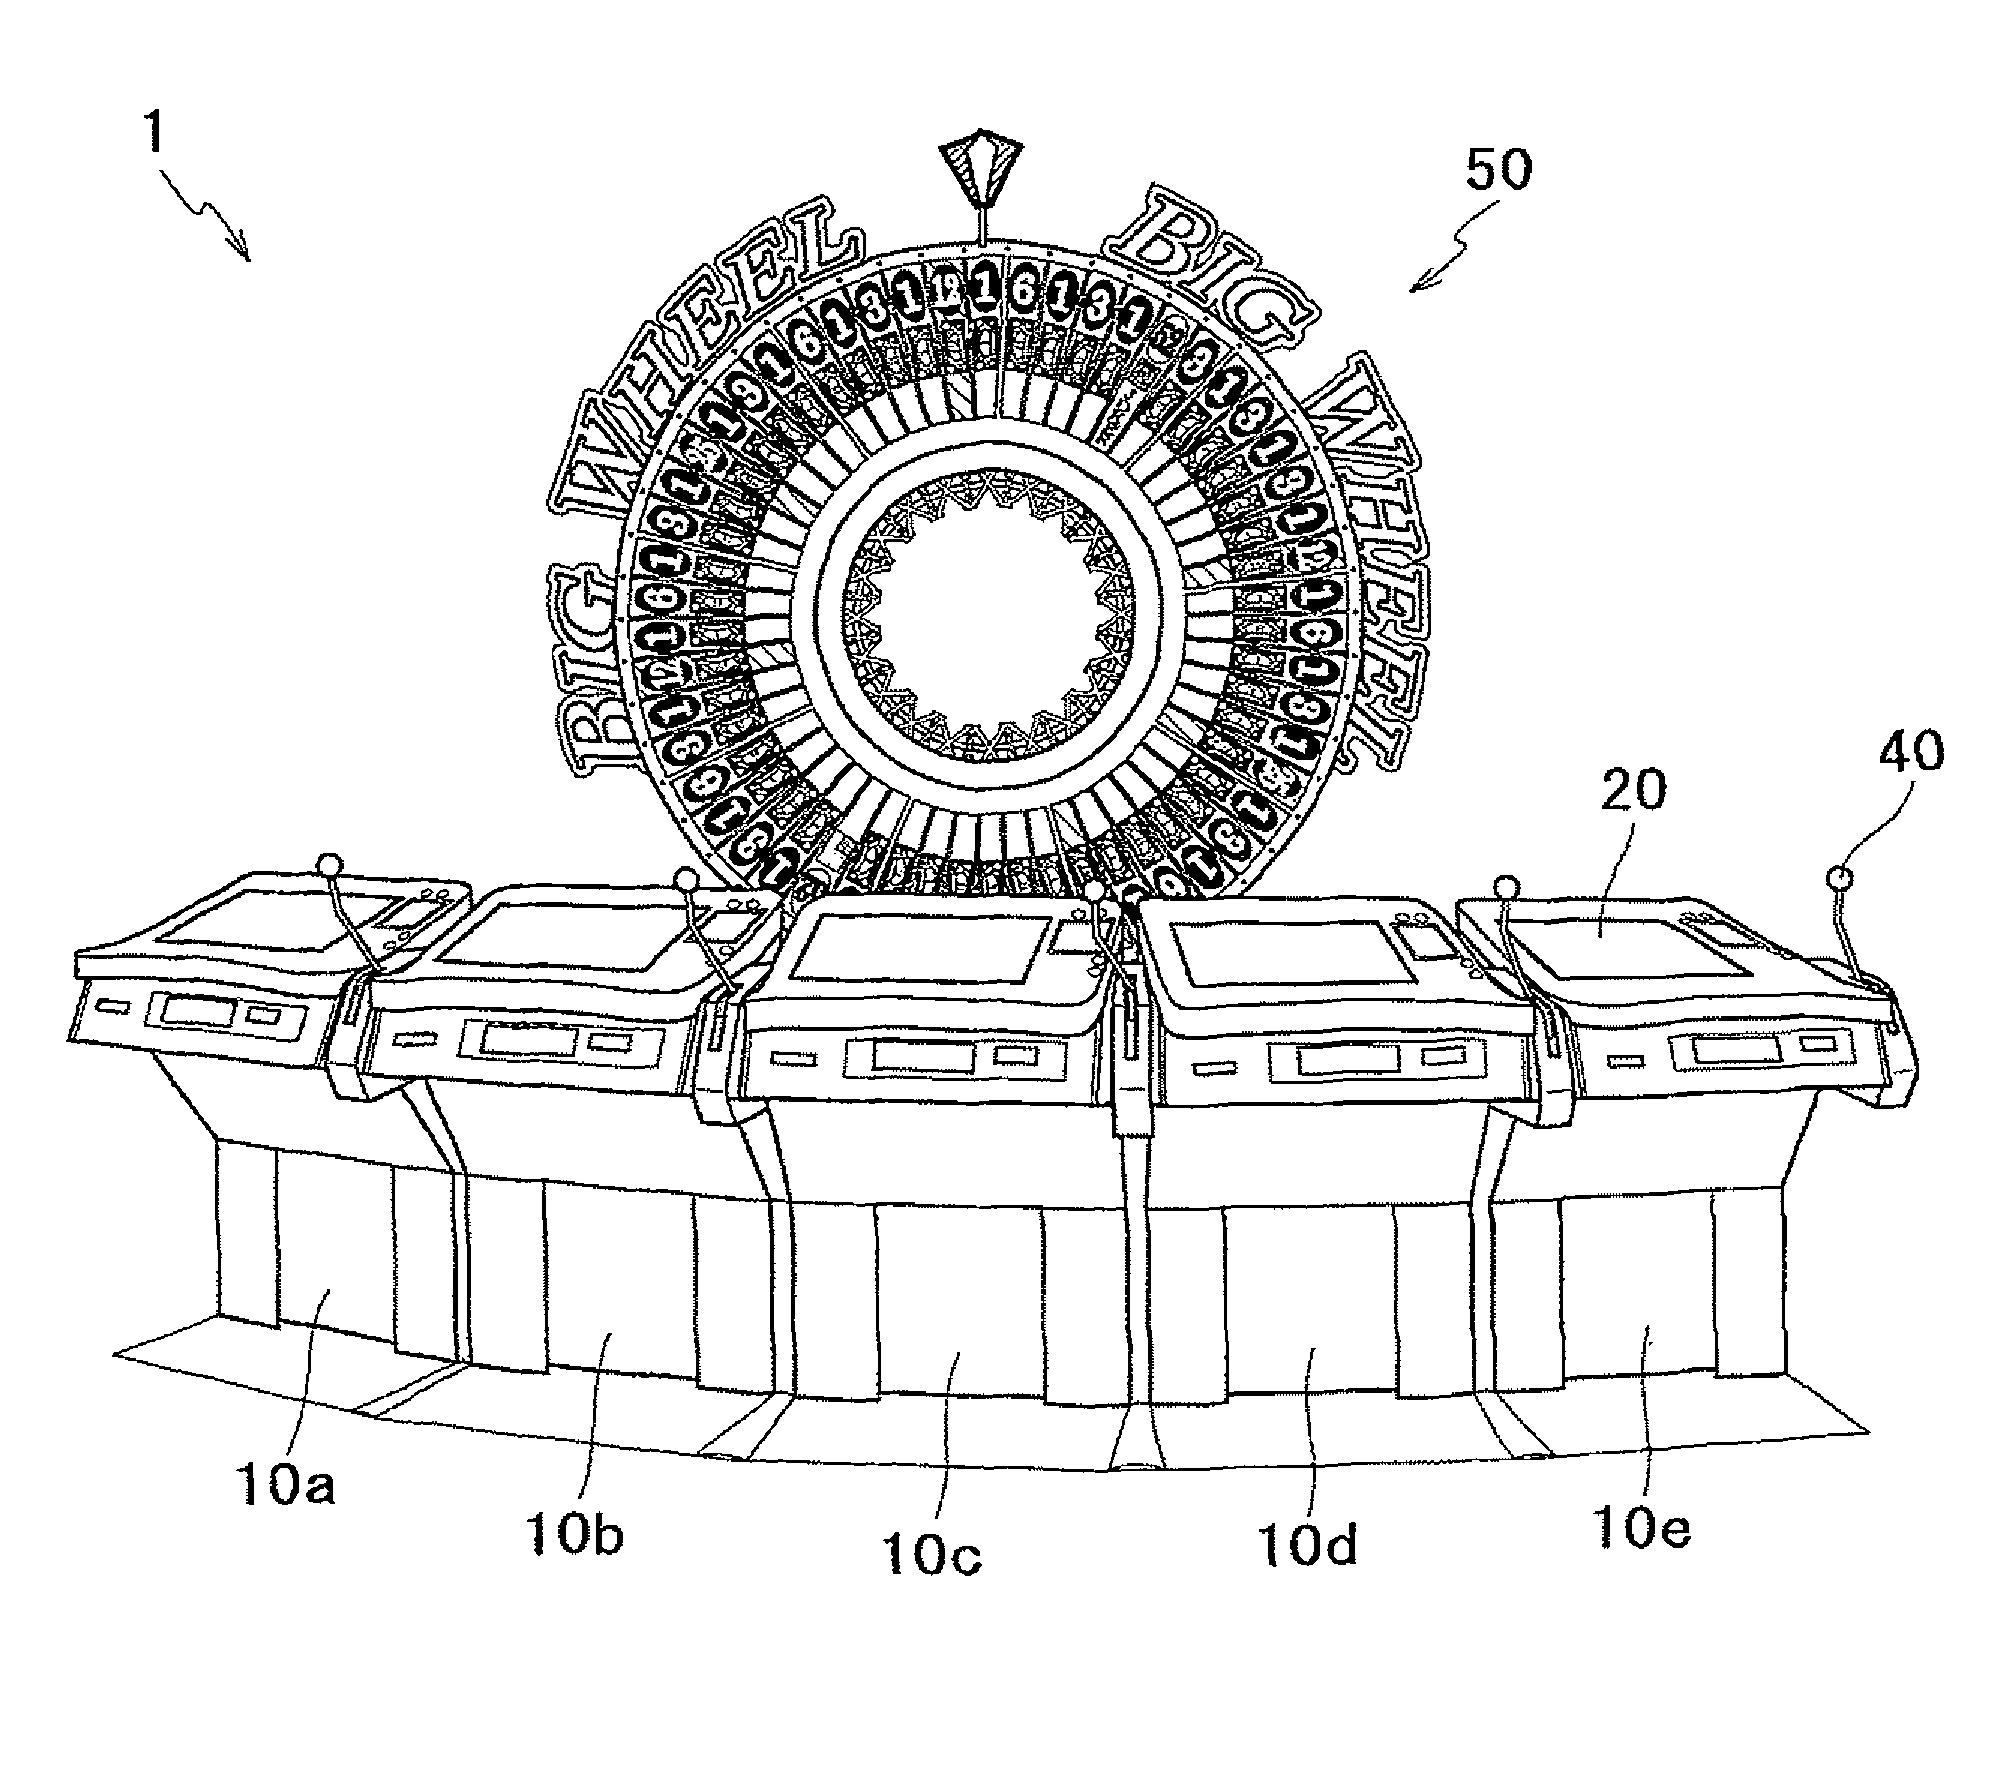 Gaming machine with spinning wheel and adjustable payout rate